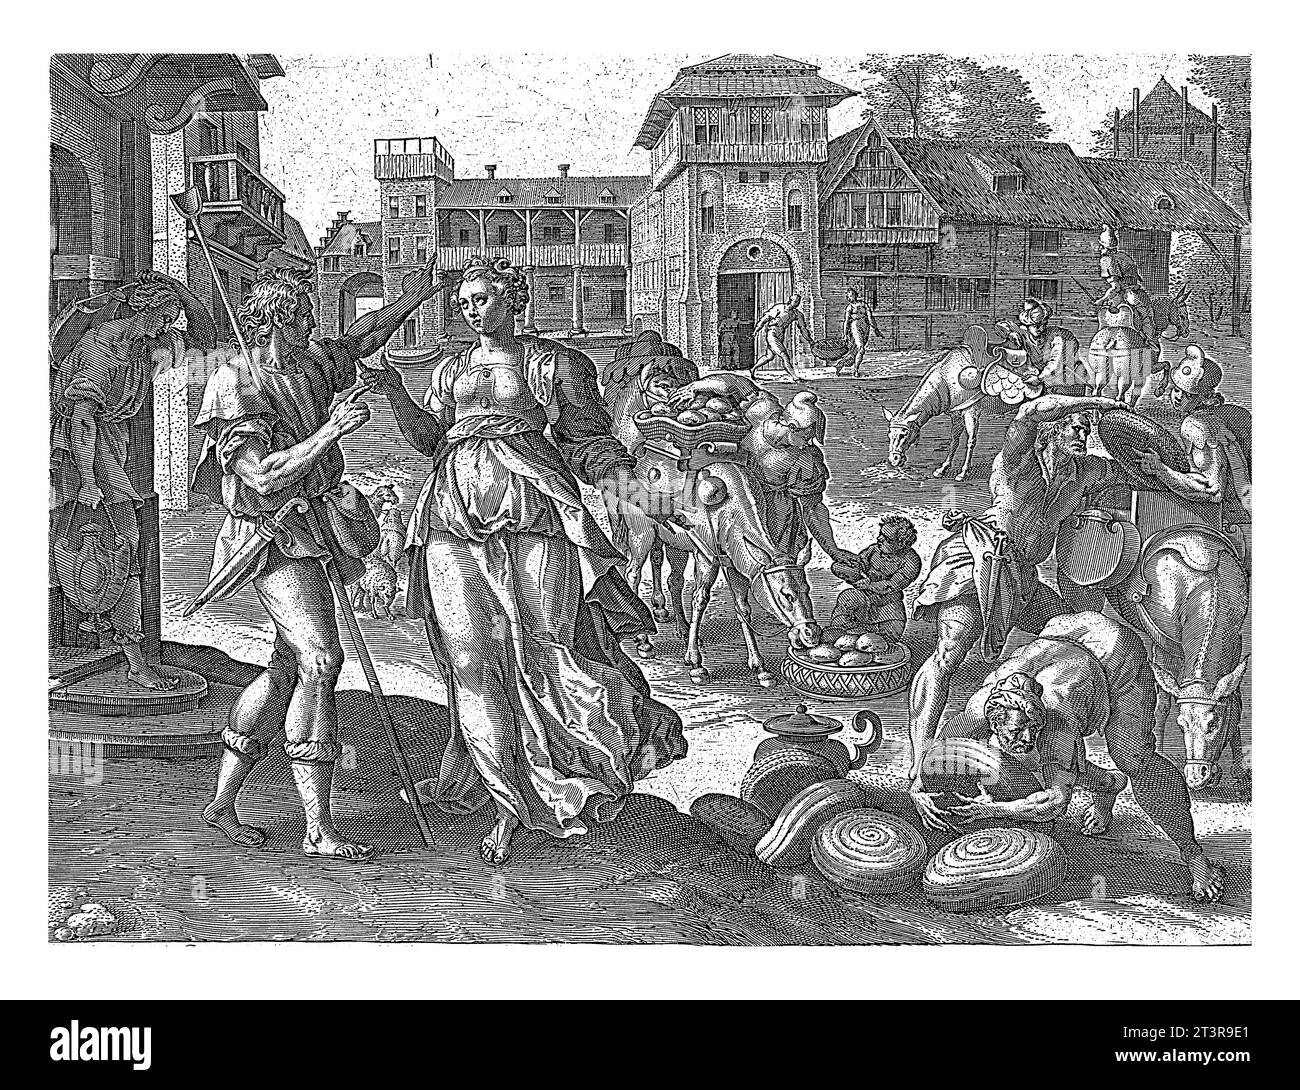 Abigail Gathering Food, Maerten de Vos, 1585 Abigail, Nabal's wife, has donkeys packed with loaves of bread and jugs of wine. She will take the food t Stock Photo